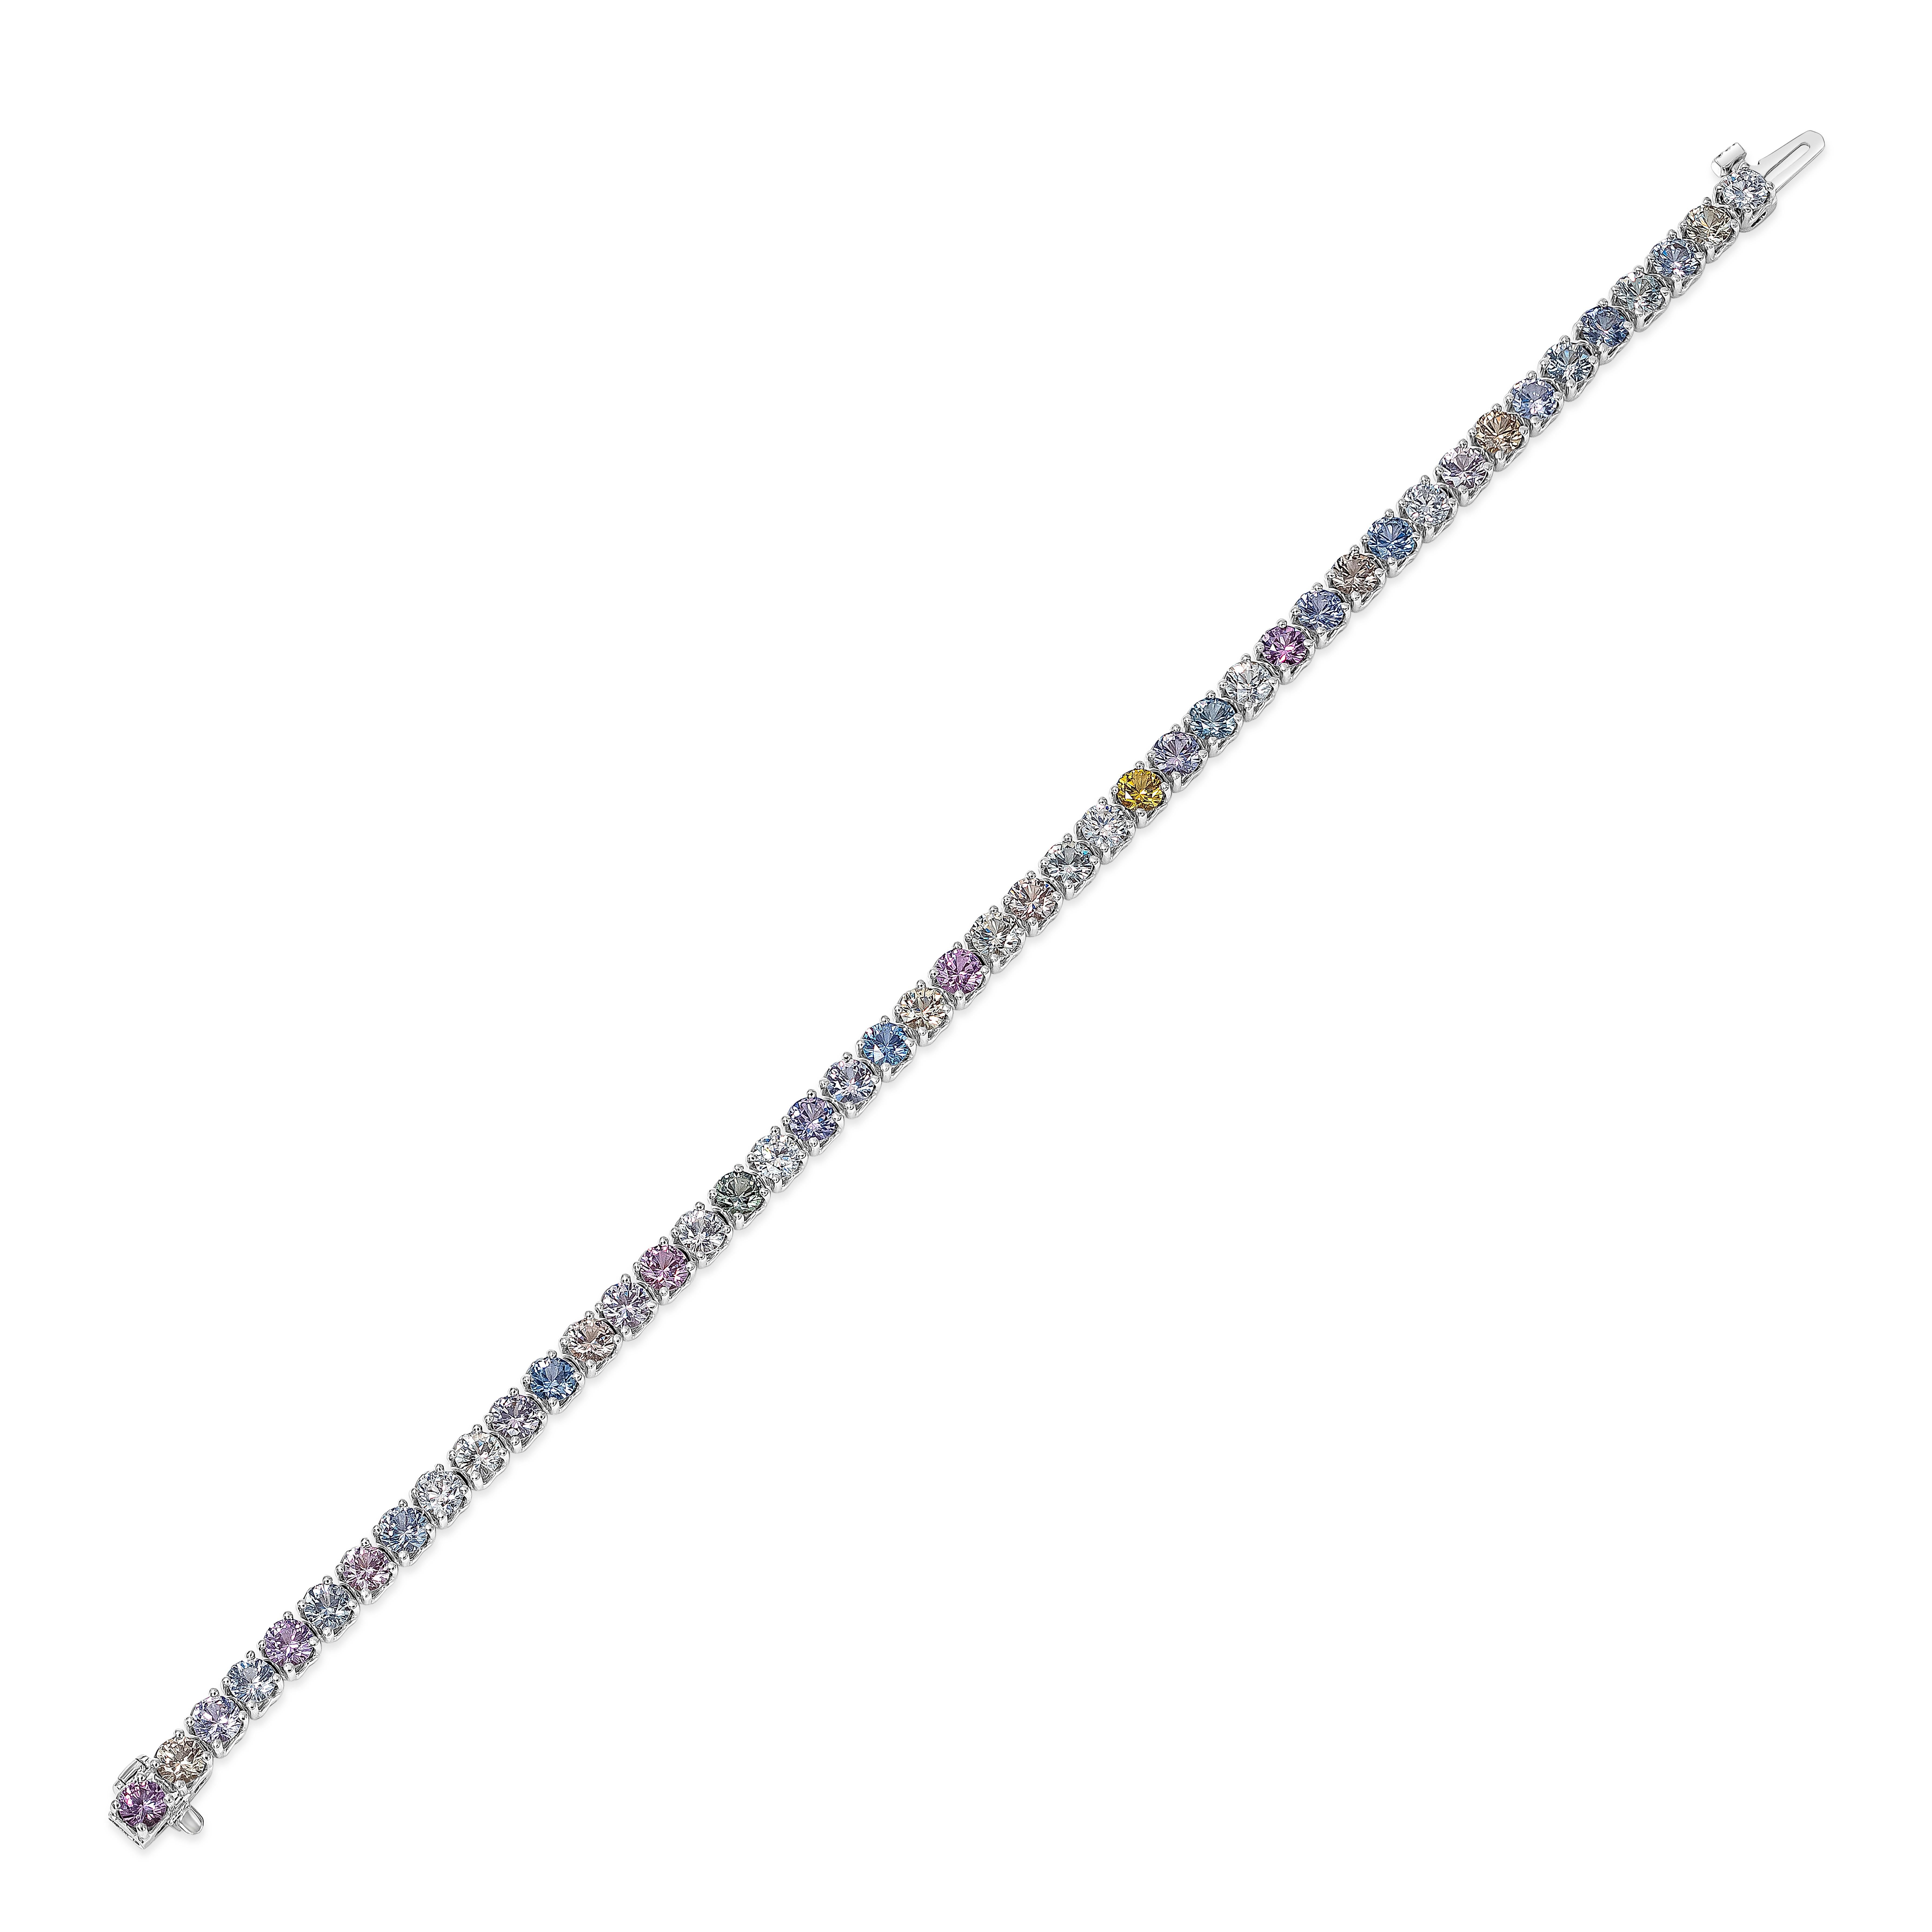 A gorgeous and unique tennis bracelet showcasing a row of round multi-color sapphires, and round brilliant diamonds, set in a polished 18K white gold mounting. Sapphires weigh 8.56 carats total, MC color and VS in Clarity. Diamonds weigh 0.88 carats